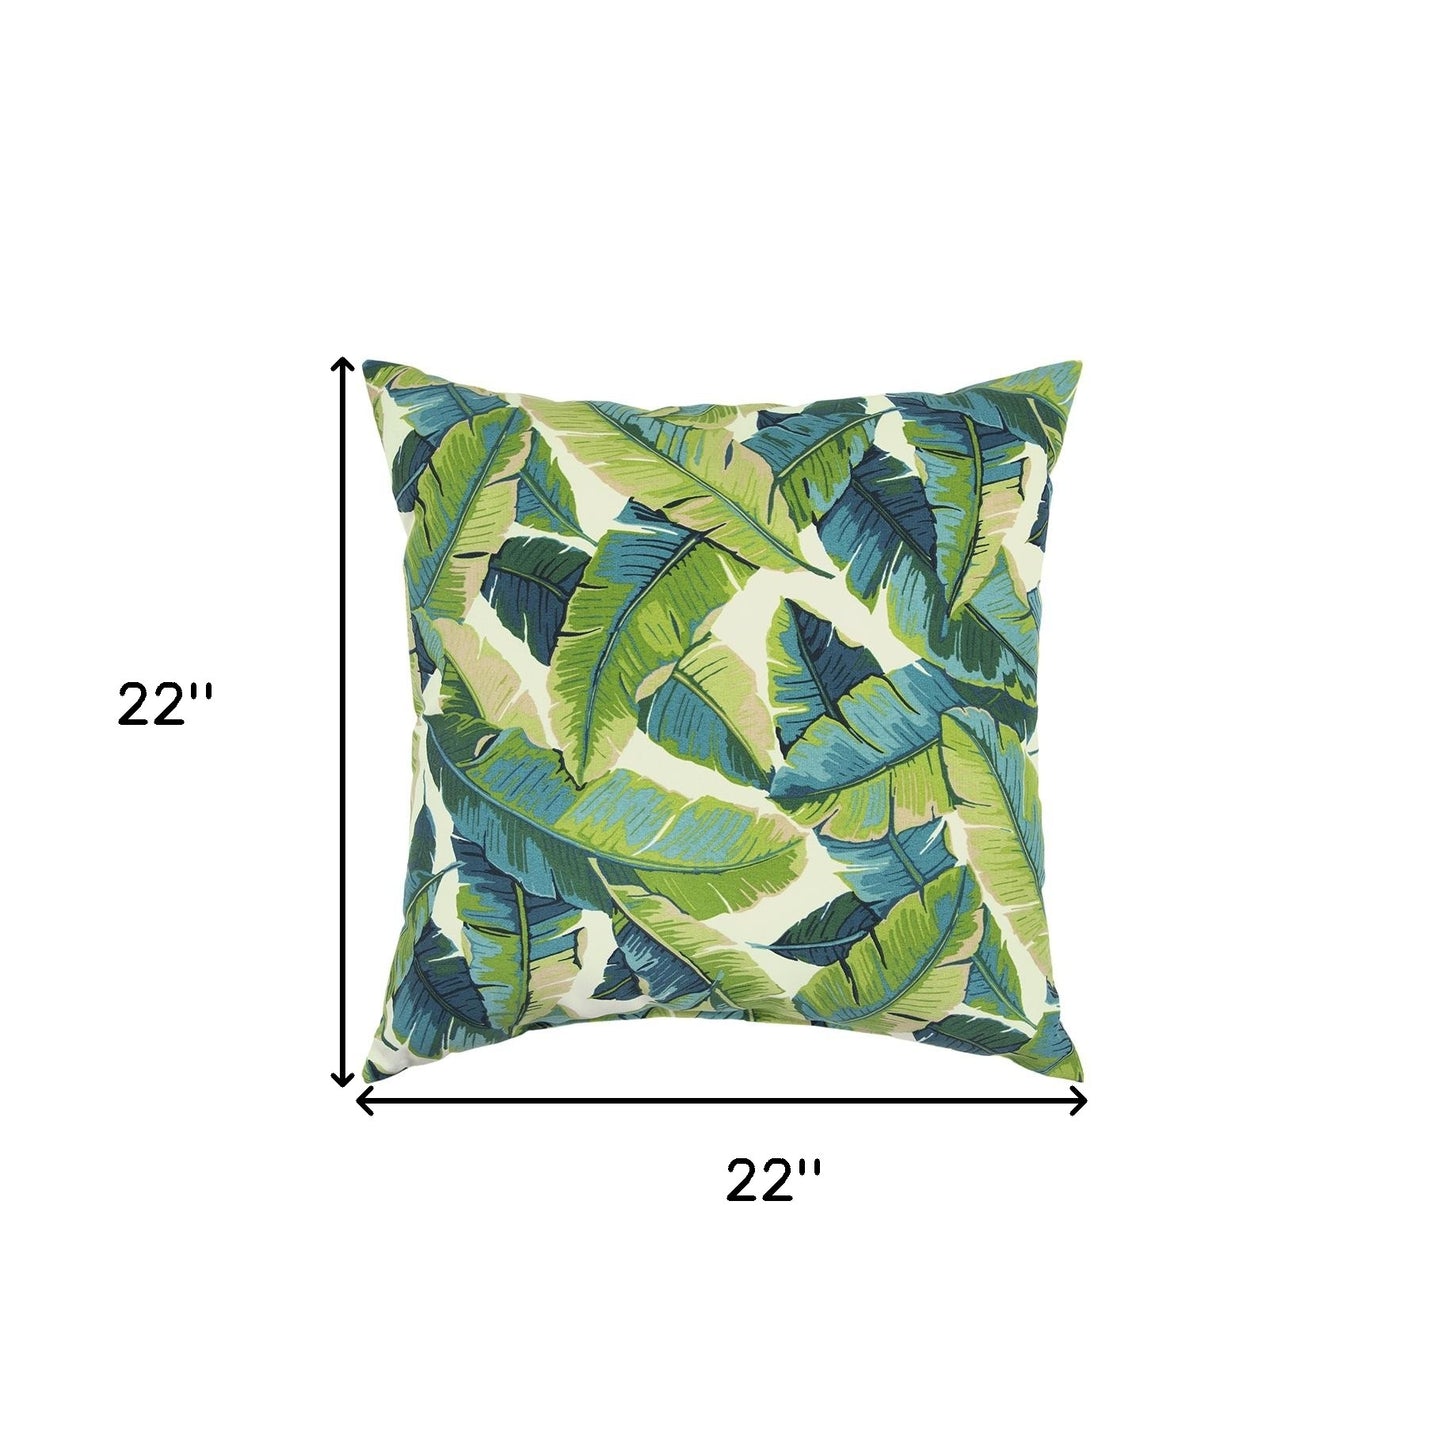 22" Blue and Green Tropical Indoor Outdoor Throw Pillow Cover and Insert